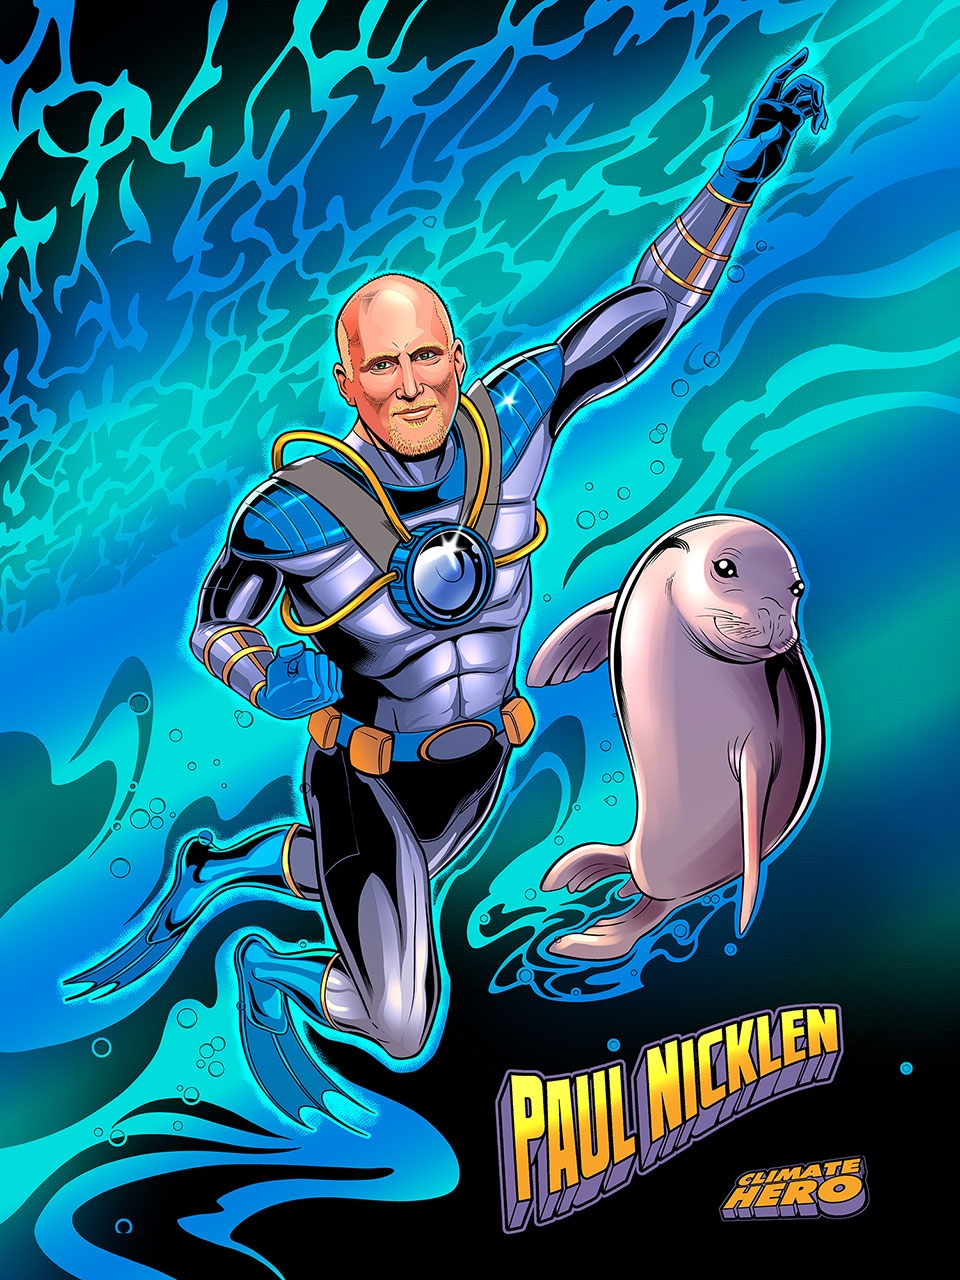 Paul Nicklen, Expedition lead and co-founder of SeaLegacy. Artwork by Jeremy Packer